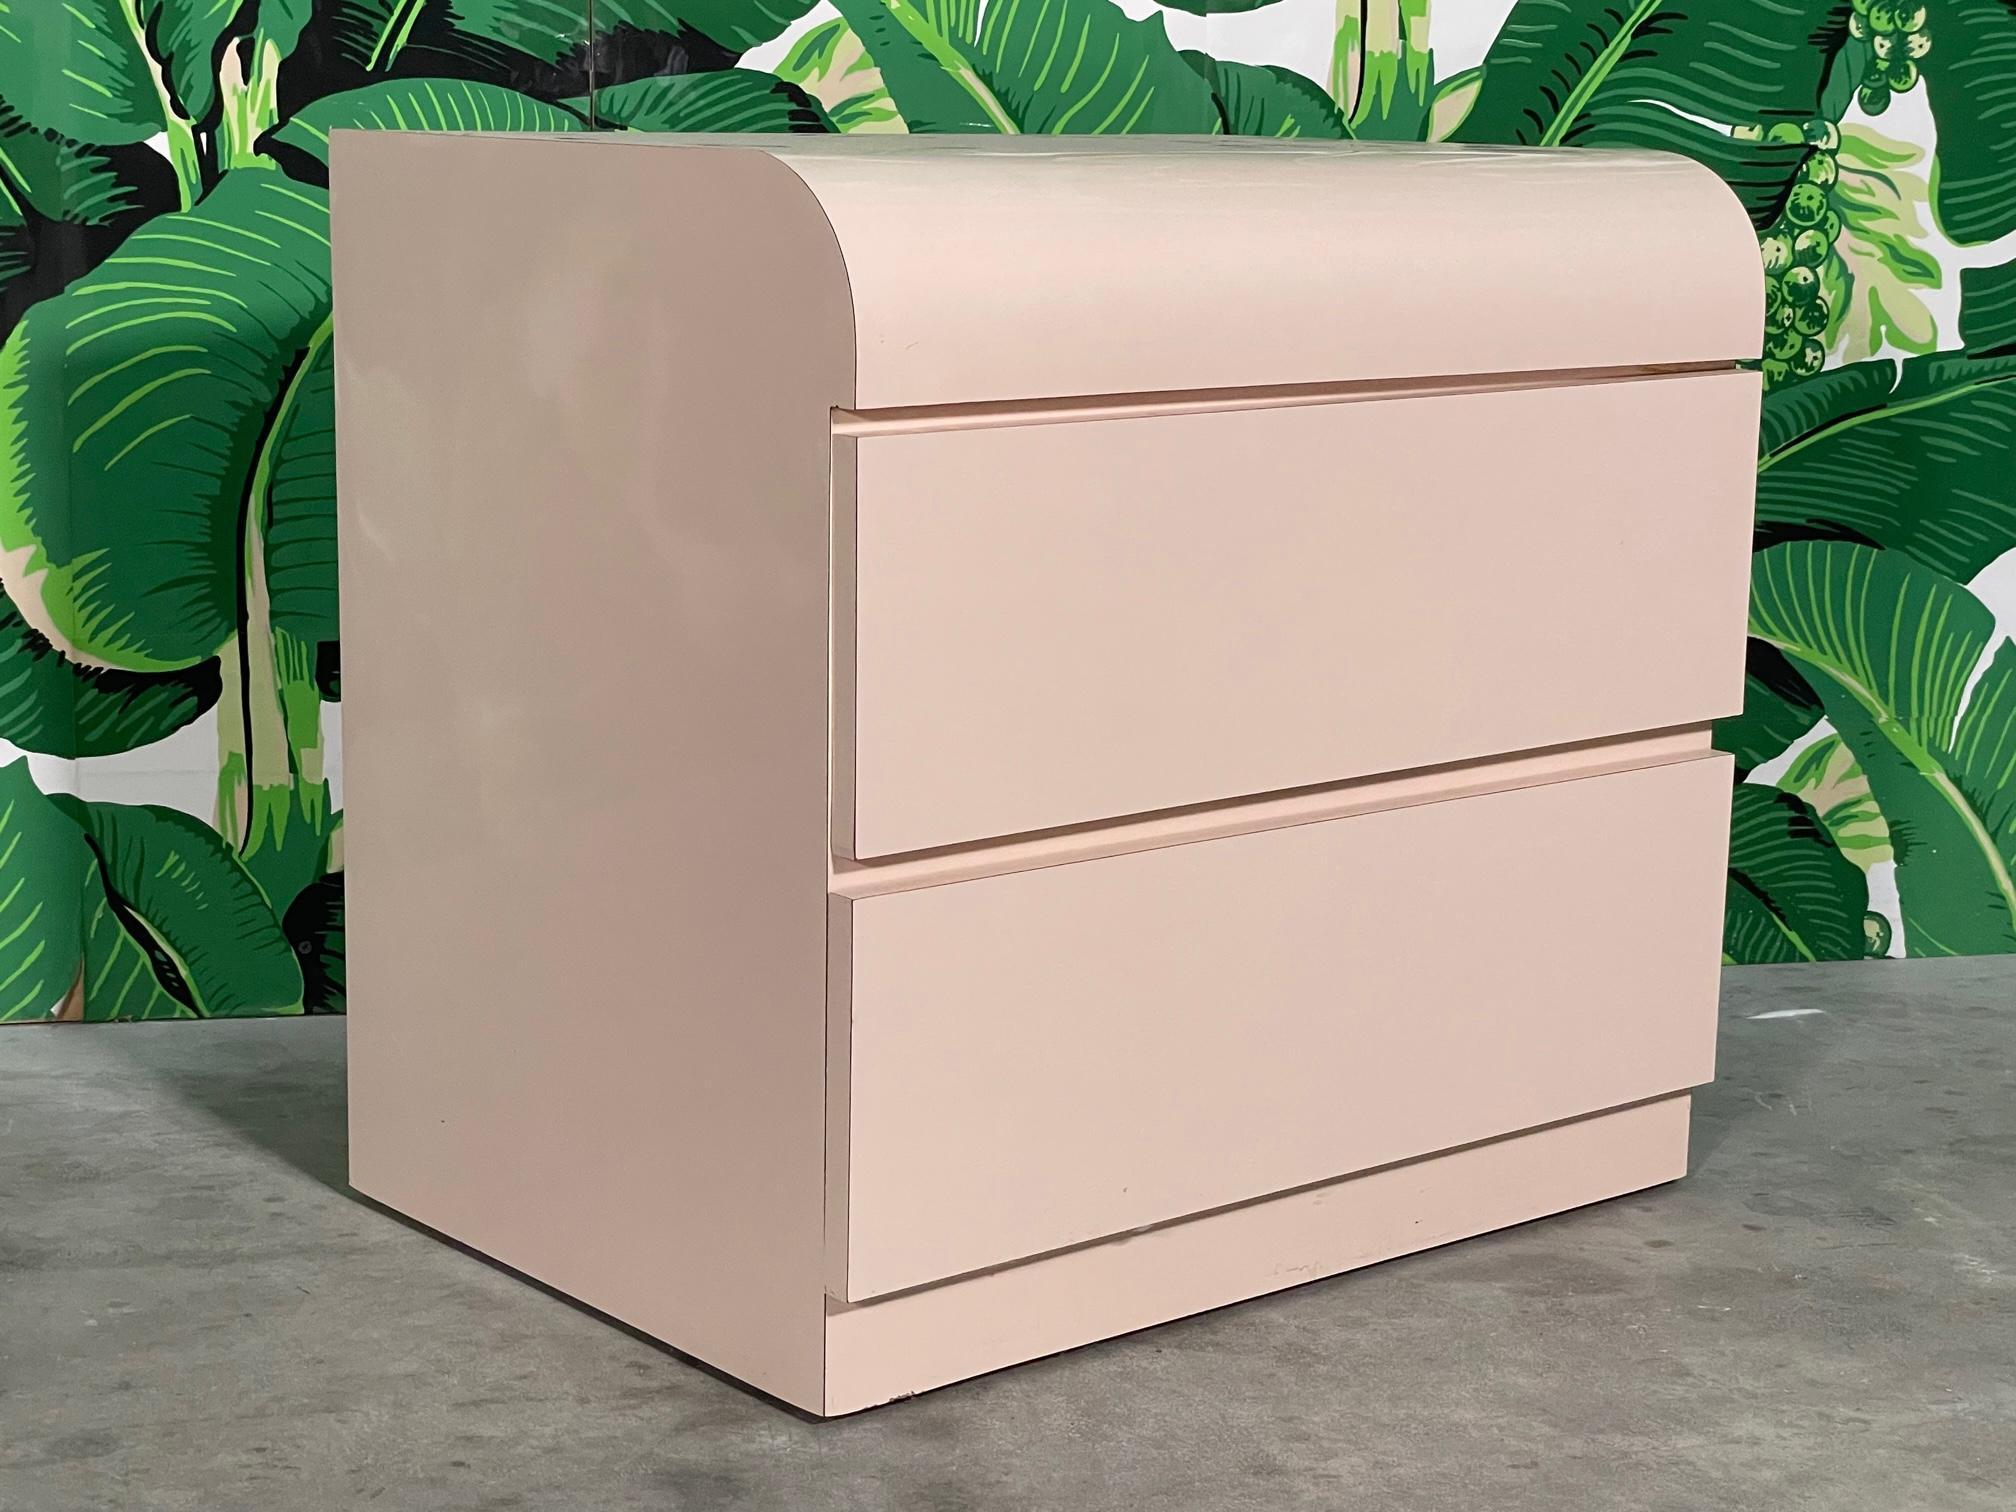 80s era nightstand features smooth waterfall front and a solid plinth style base. Styling reminiscent of Karl Springer. Good condition with minor imperfections and drawers operate like new. See photos for condition details. 
For a shipping quote to